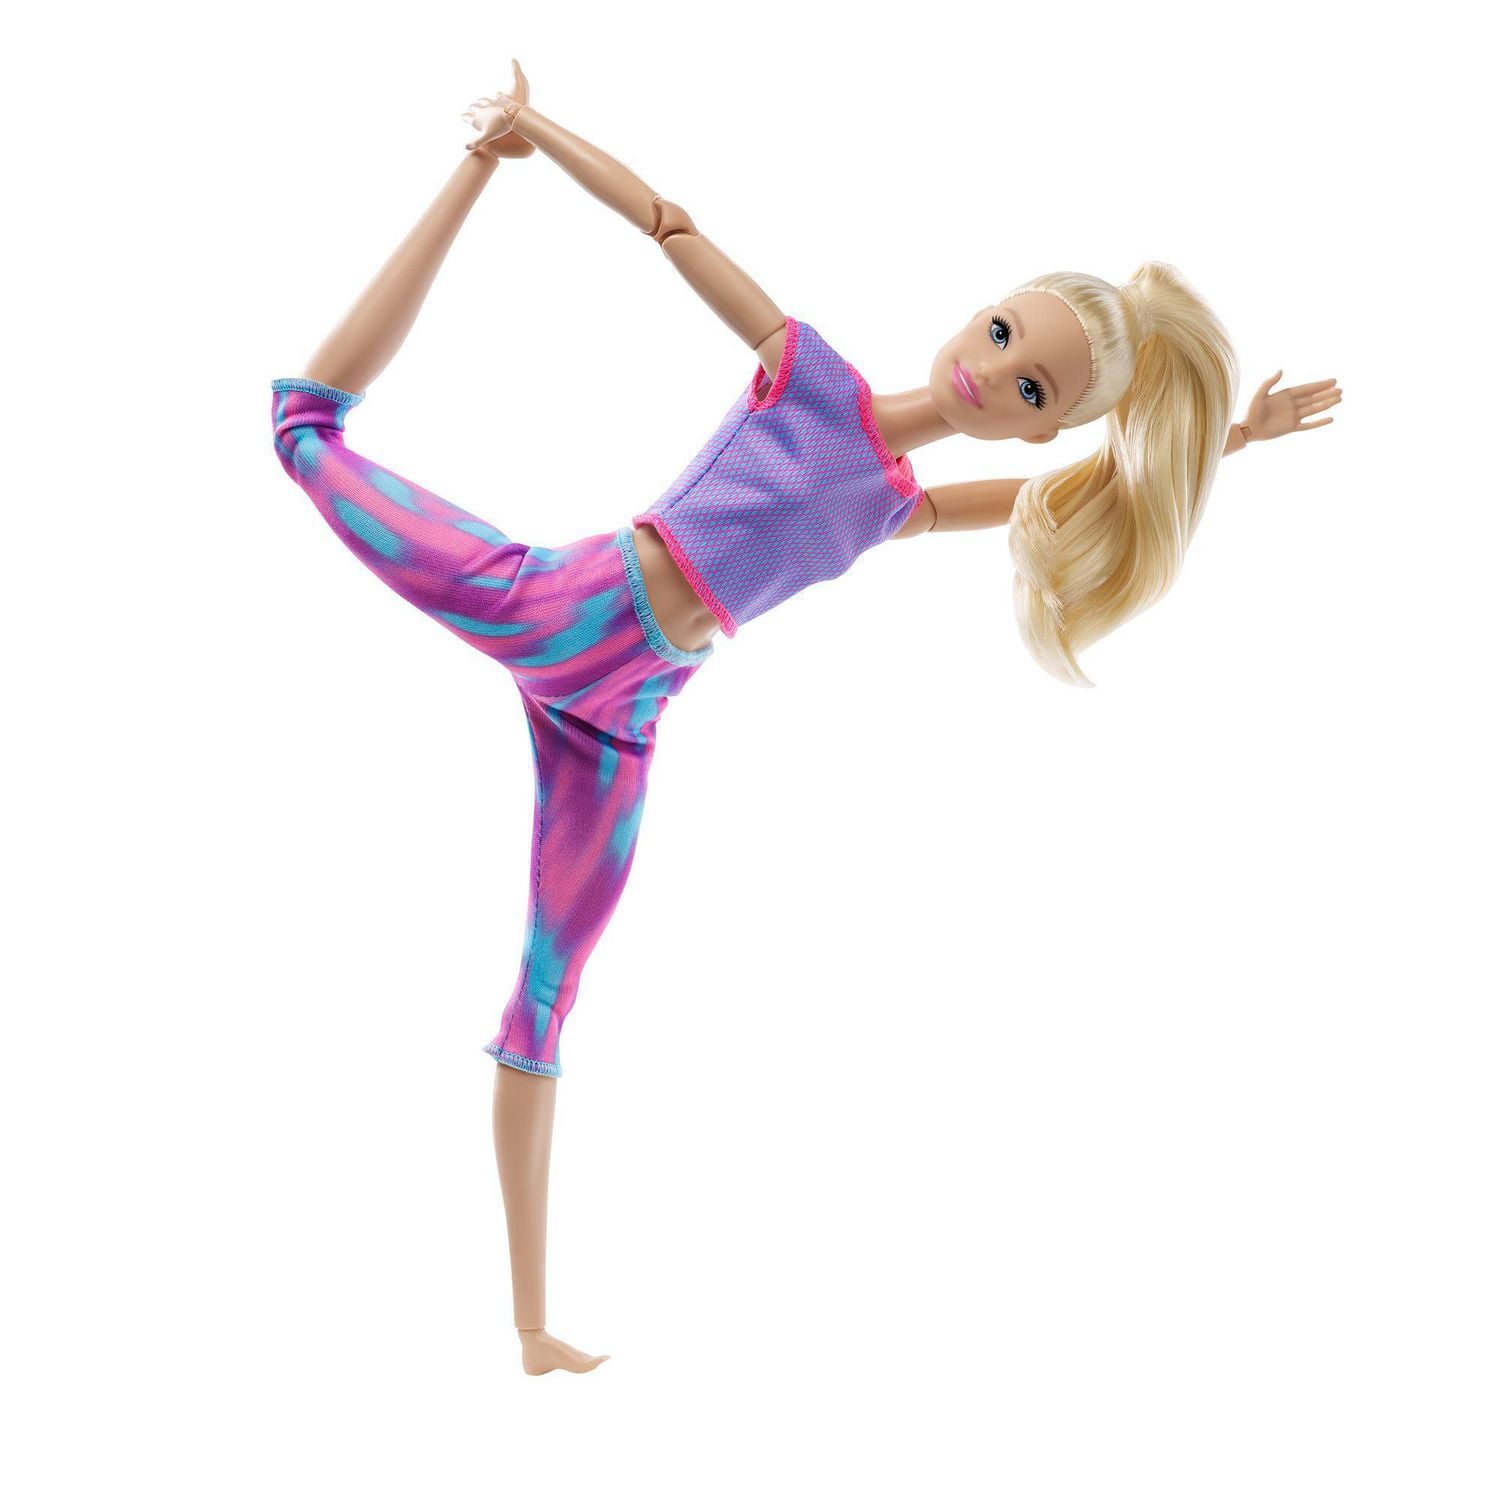 Original Barbie Made To Move Doll, Toy Yoga Dolls Blonde Flexible